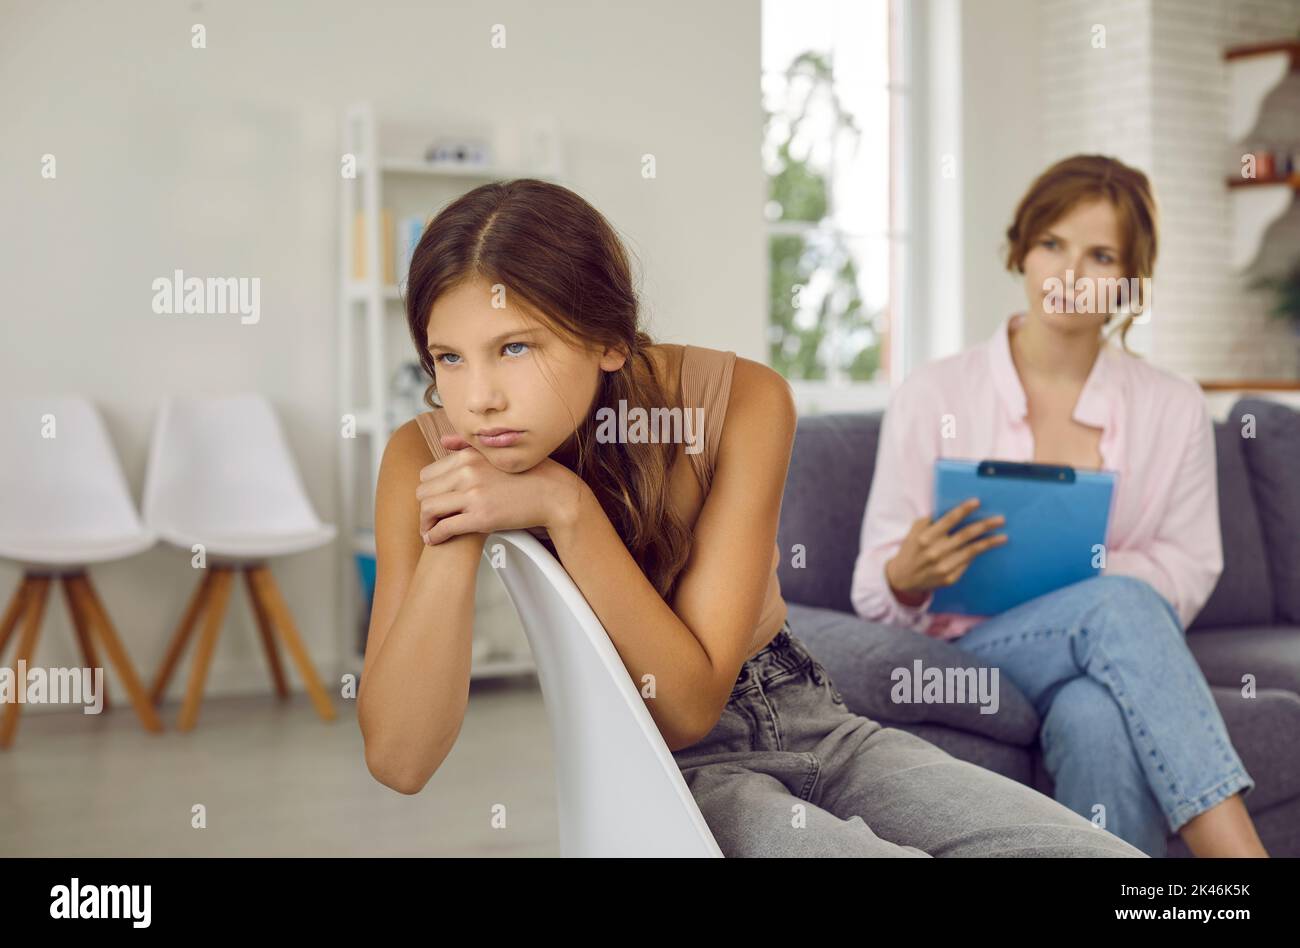 Sad teenage girl does not want to talk about problems and refuses to talk to psychologist. Stock Photo